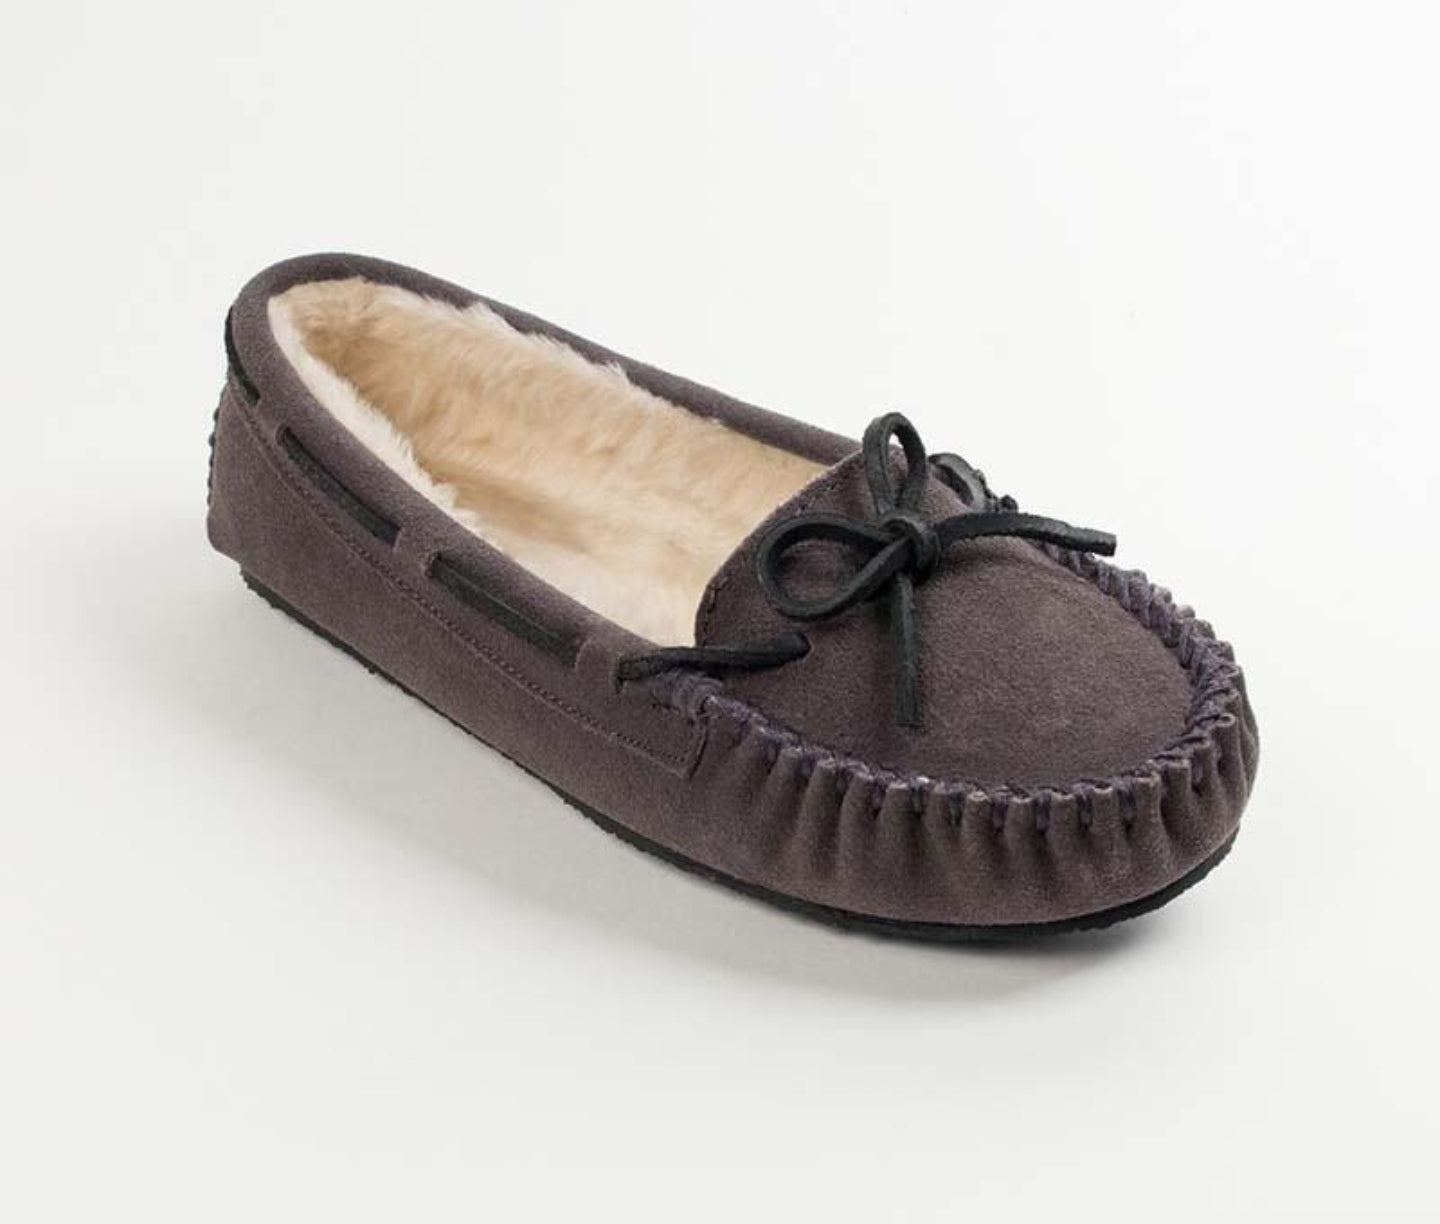 Moccasin Slippers for Women with Upper Leather 7 US Shoe for sale | eBay